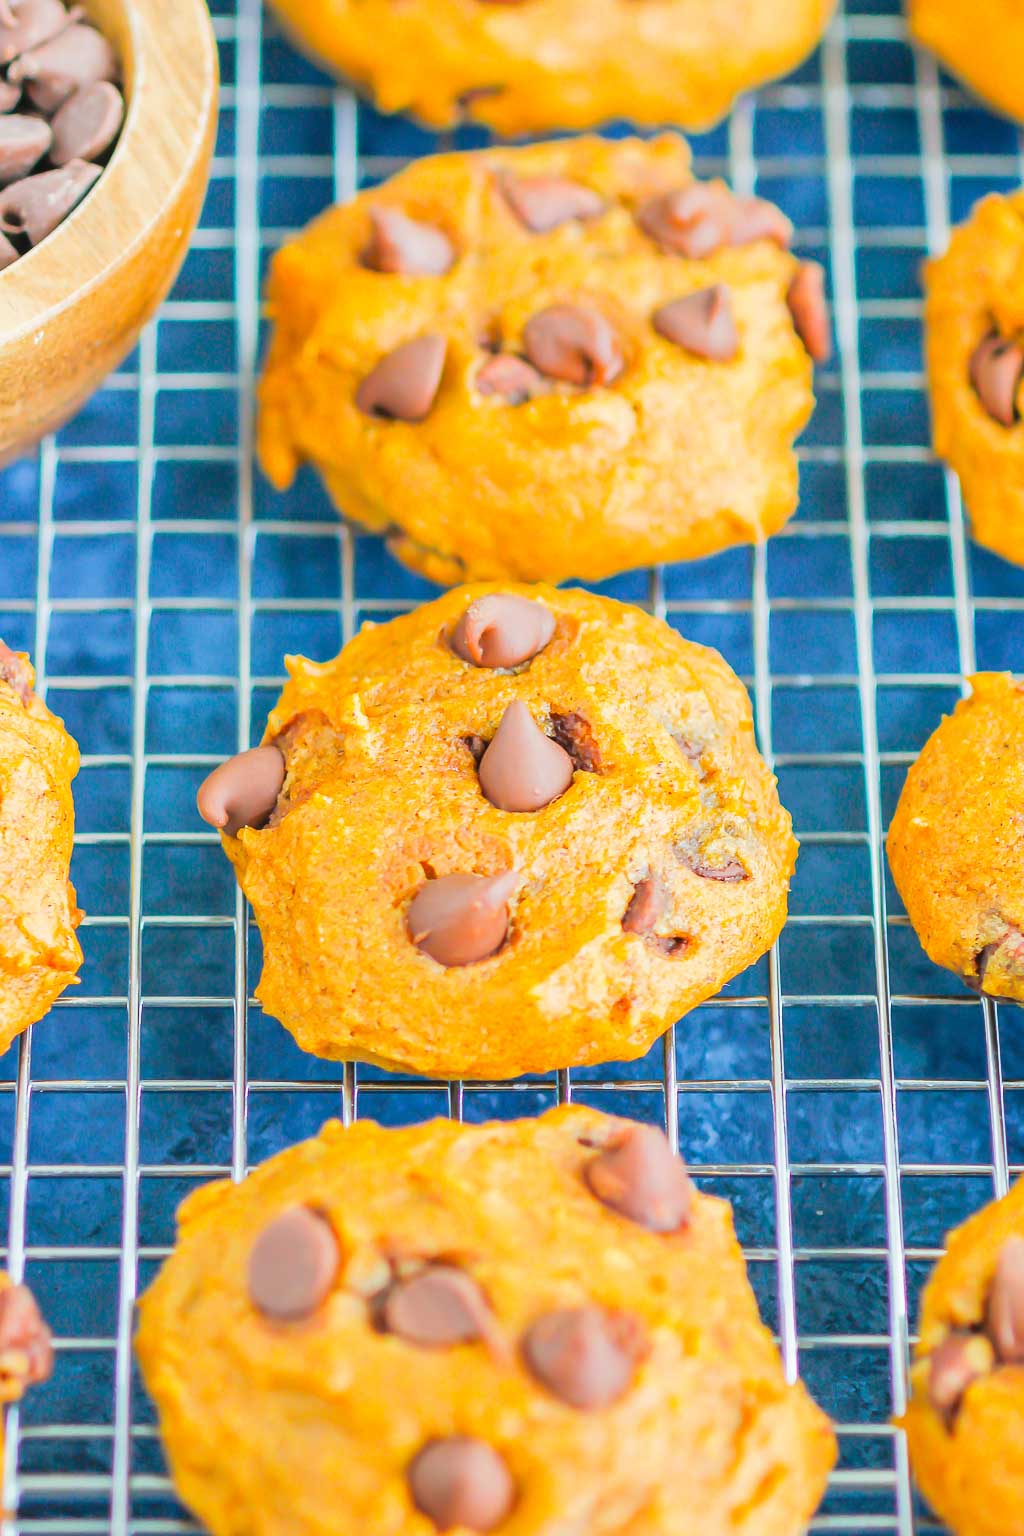 Pumpkin Chocolate Chip Cookies are an easy, one bowl recipe that's ready in no time. These cookies bake up soft and cakey, with hints of pumpkin and sweet chocolate. It's the perfect combination for an autumn sweet treat! #cookies #pumpkincookies #pumpkinchocolatechipcookies #pumpkindessert #falldessert #pumpkinrecipe